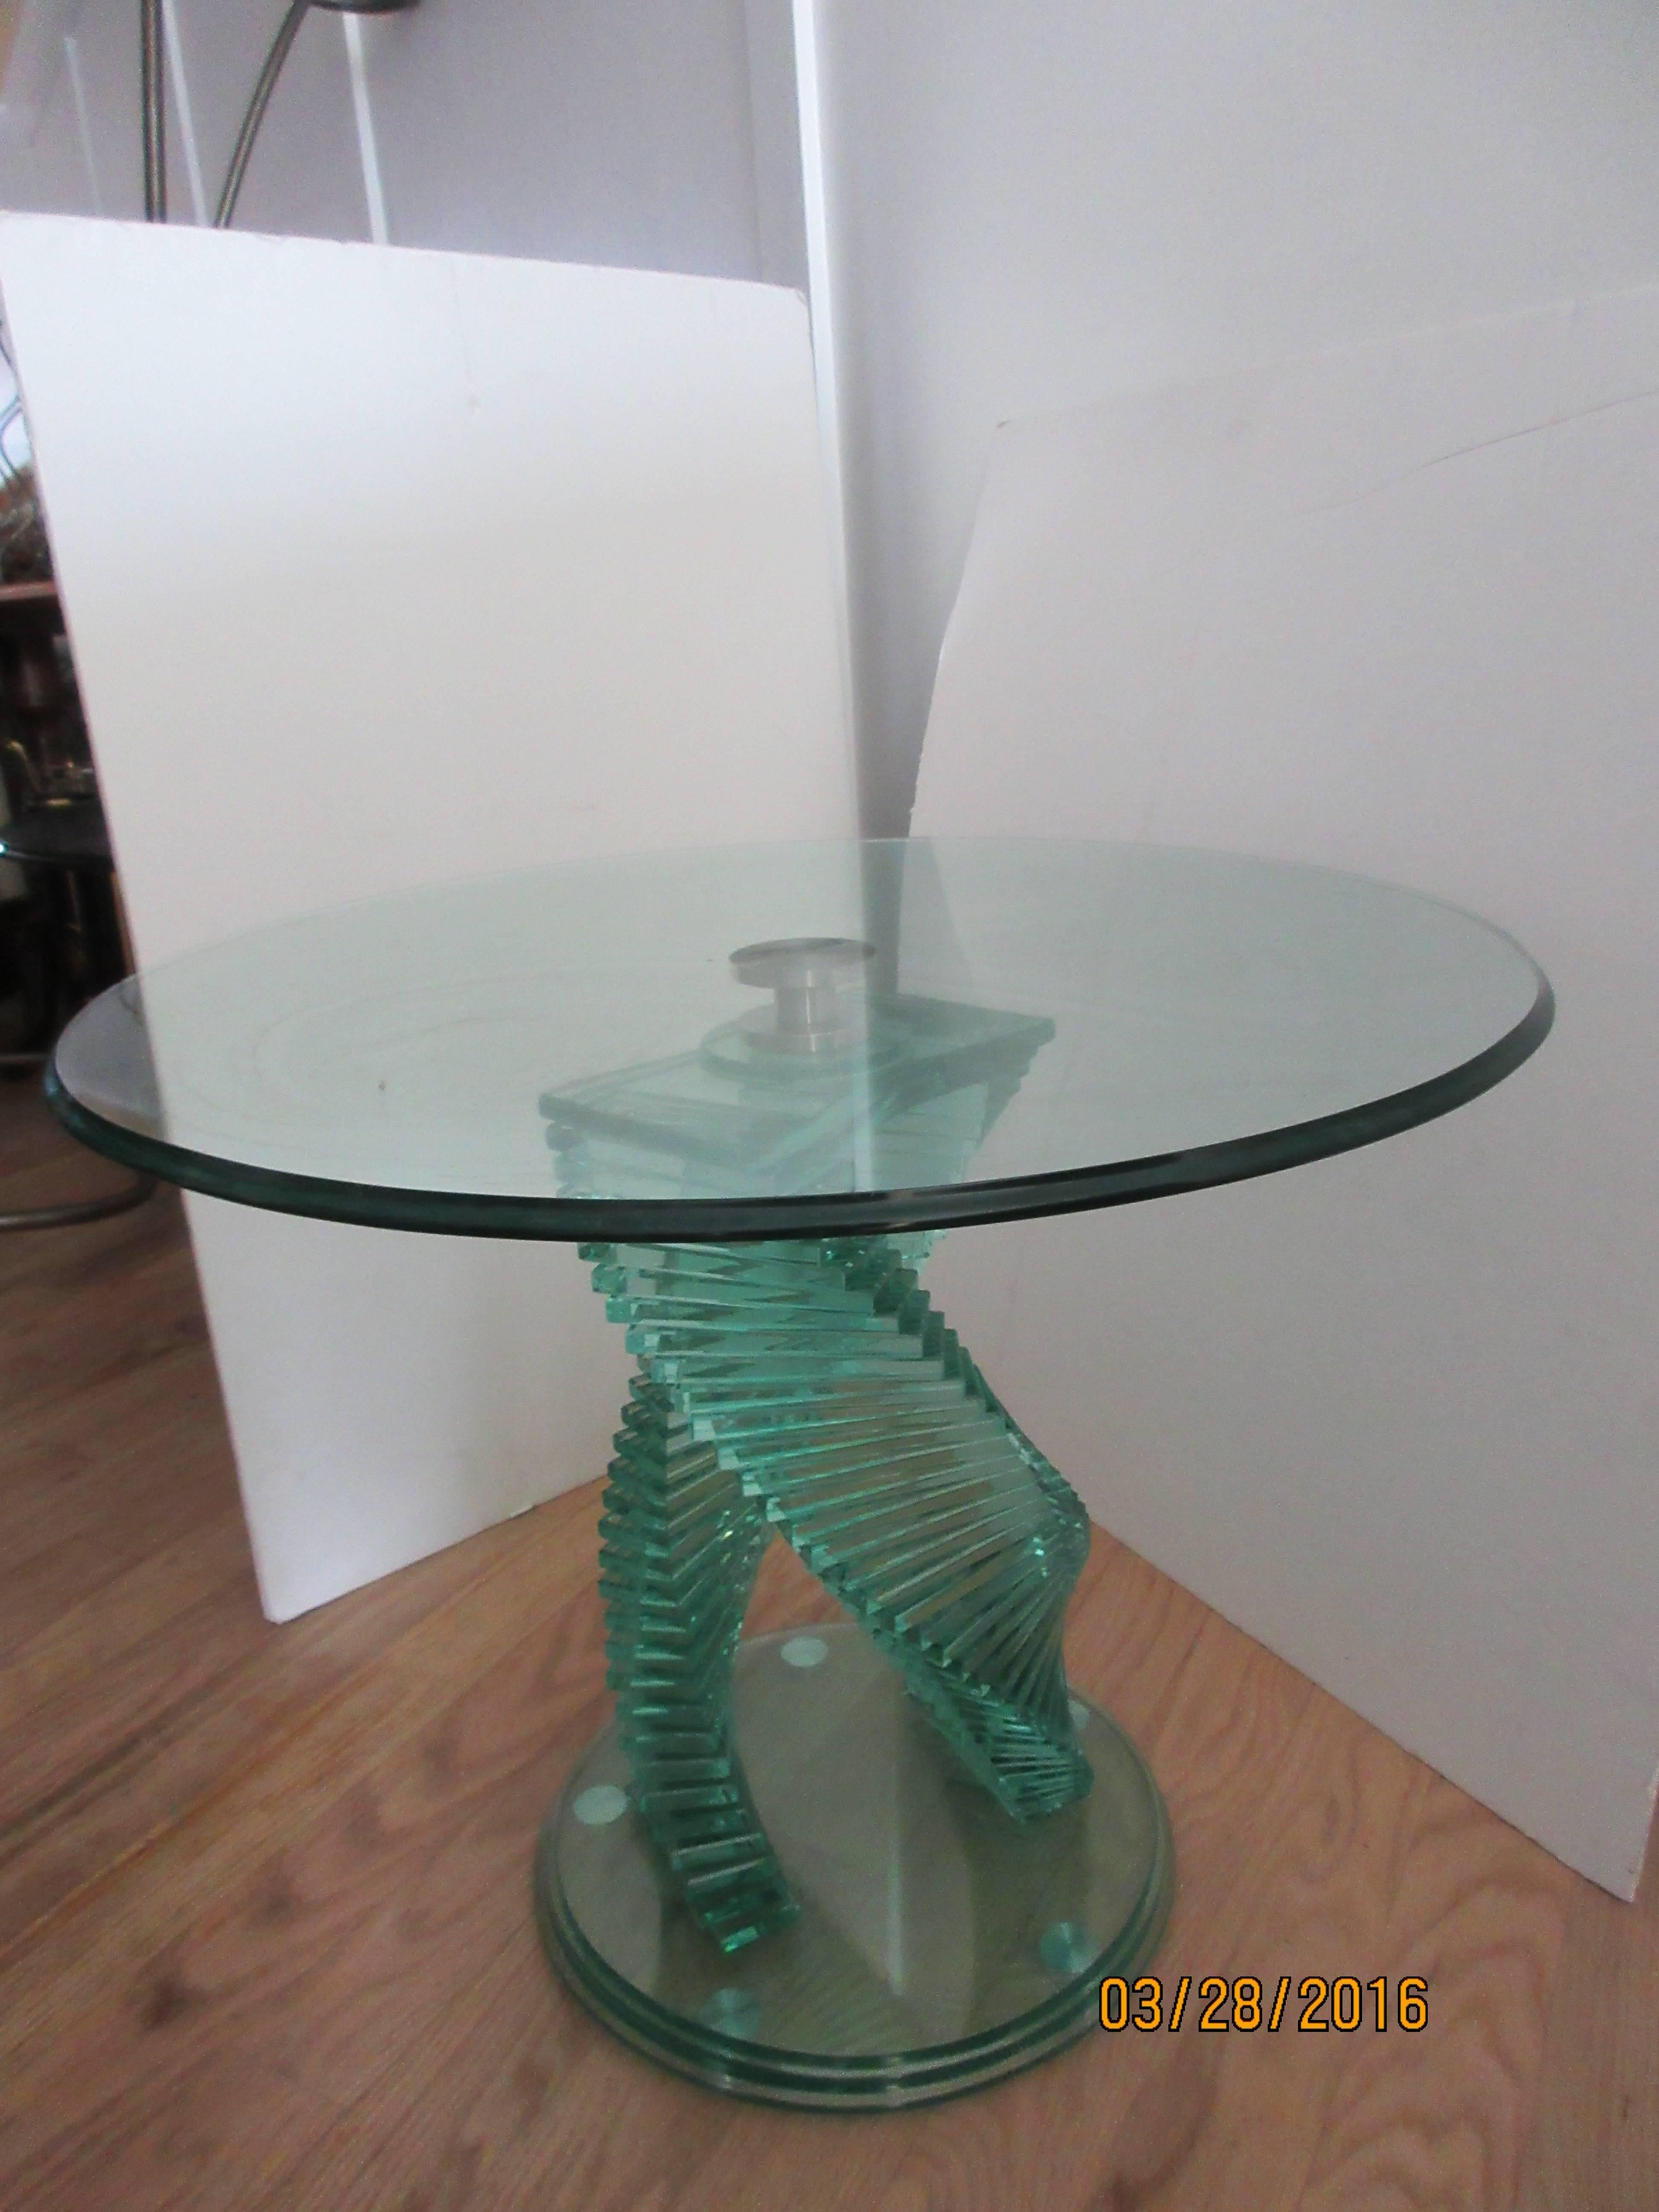 A pair of Danny Lane style modern glass step tables, beautifully designed with a 1/2 inch thick 
beveled top, the base too is over 1/2 inch in thickness. The double step pedestals swirl to a polished chrome center.